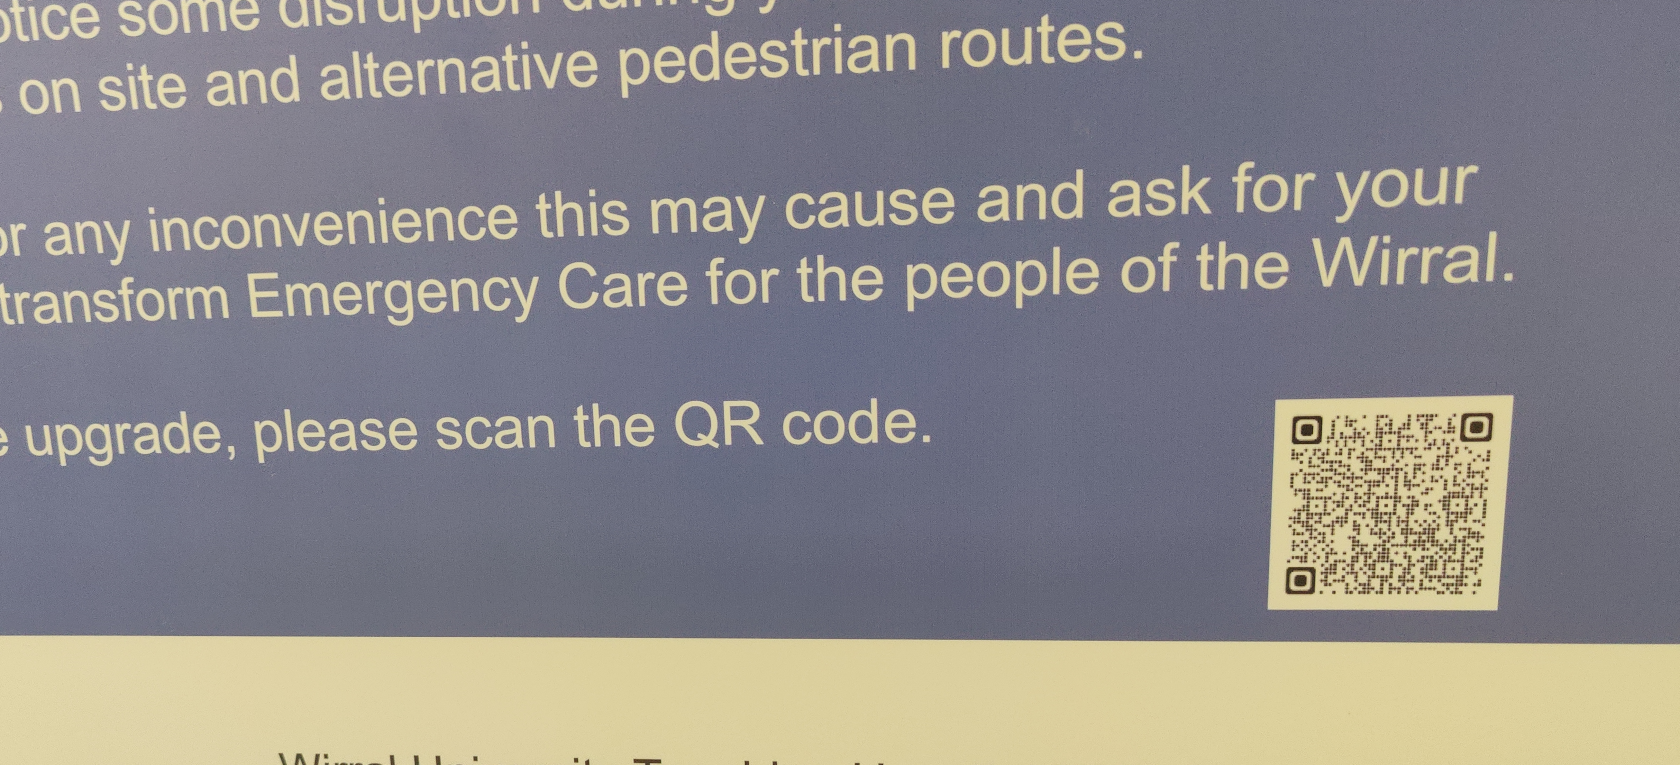 A blue and white sign in an NHS hospital. It directs visitors to scan a qr code